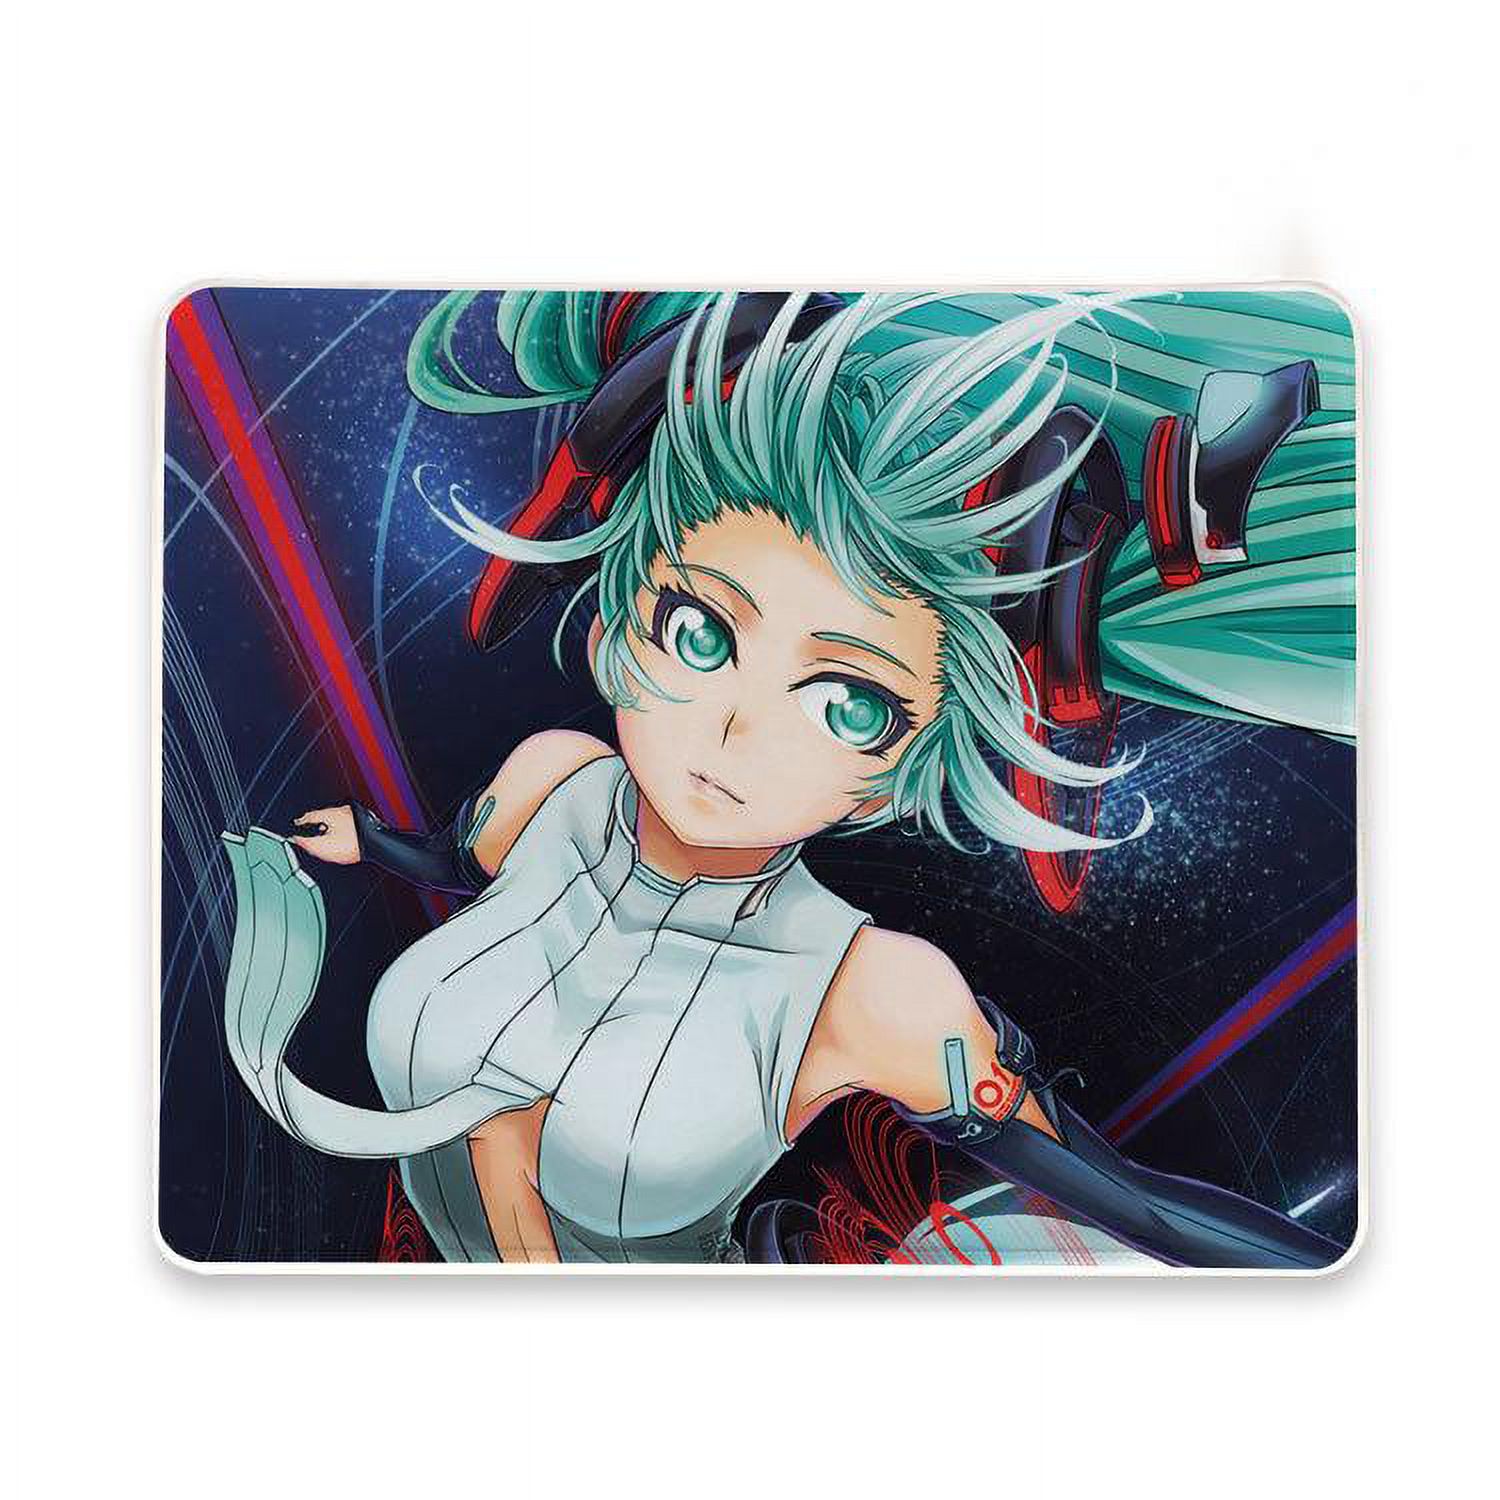 Non-Slip Mouse Pad for Home, Office, and Gaming Desk mousepad anti-slip mouse pad mat mice mousepad desktop mouse pad laptop mouse pad gaming mouse pad - image 1 of 7